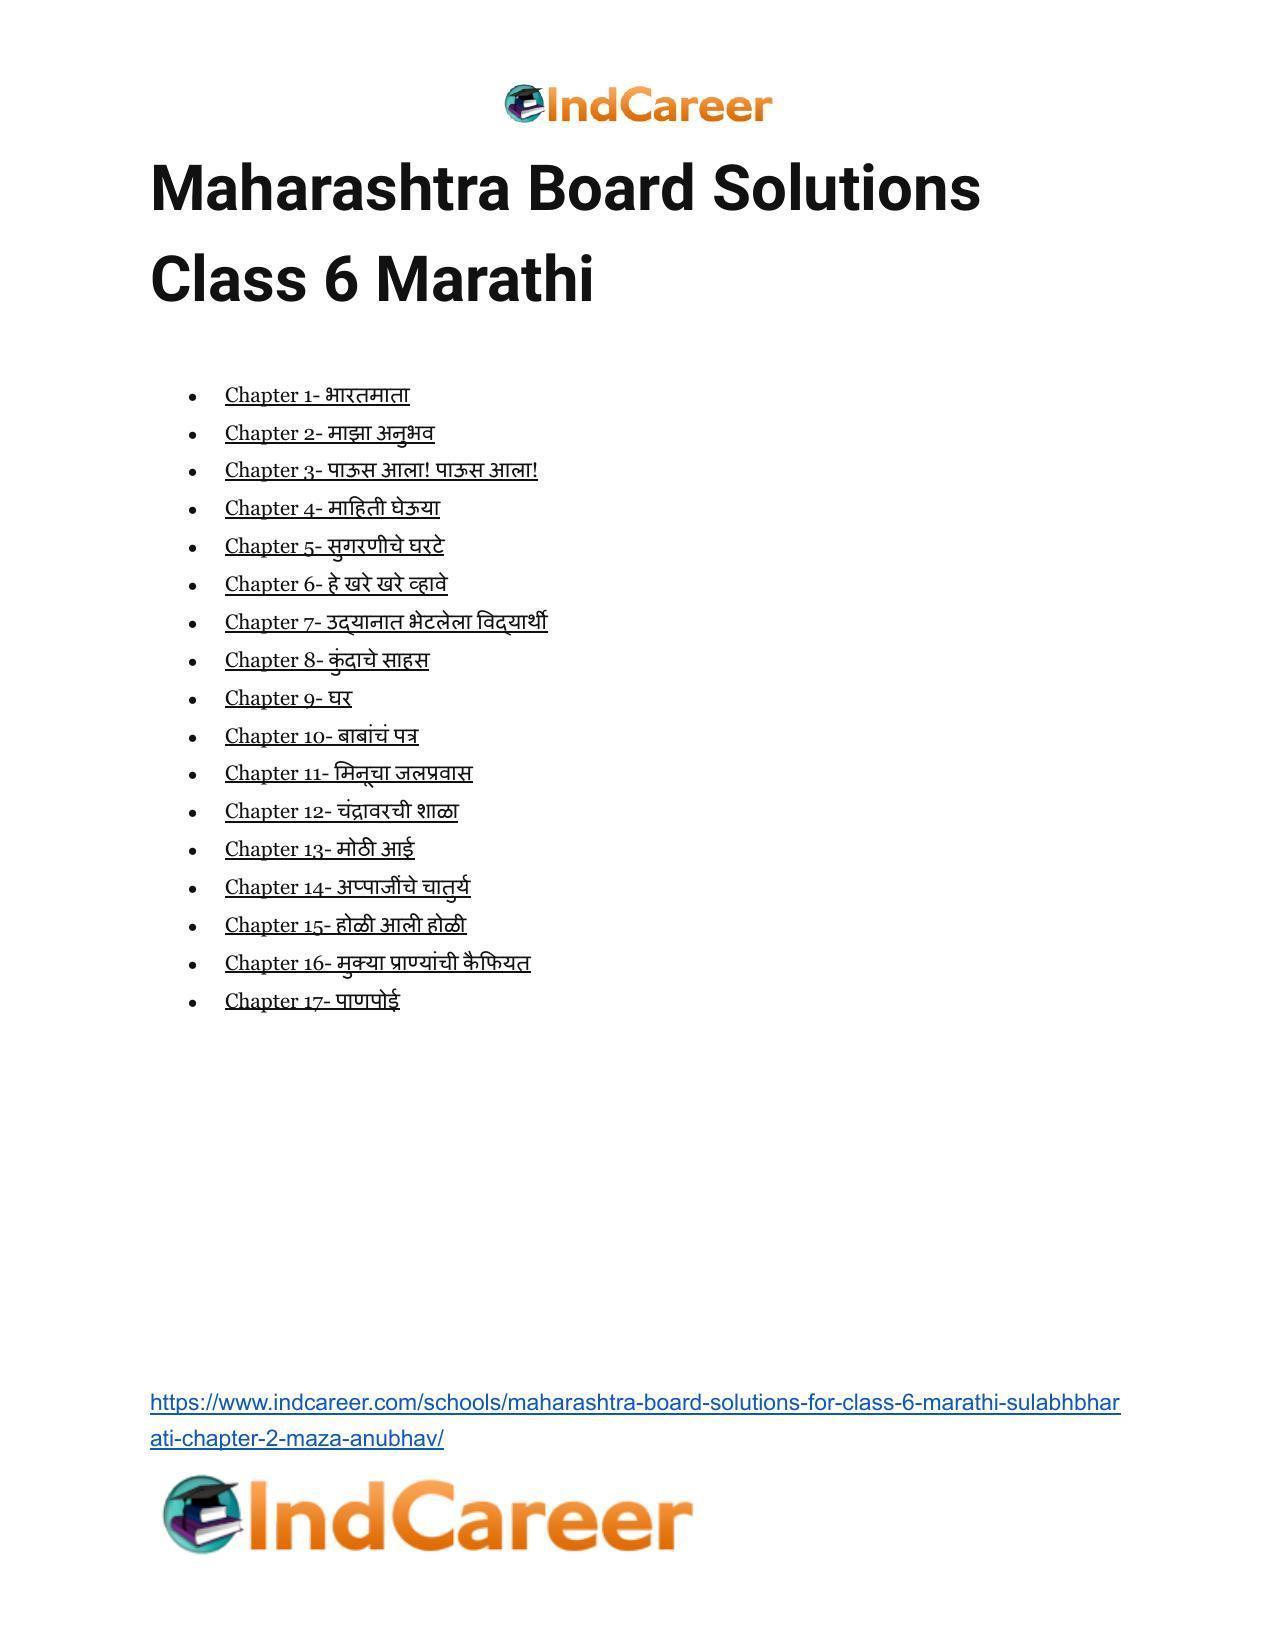 Maharashtra Board Solutions for Class 6- Marathi Sulabhbharati: Chapter 2- माझा अनुभव - Page 20